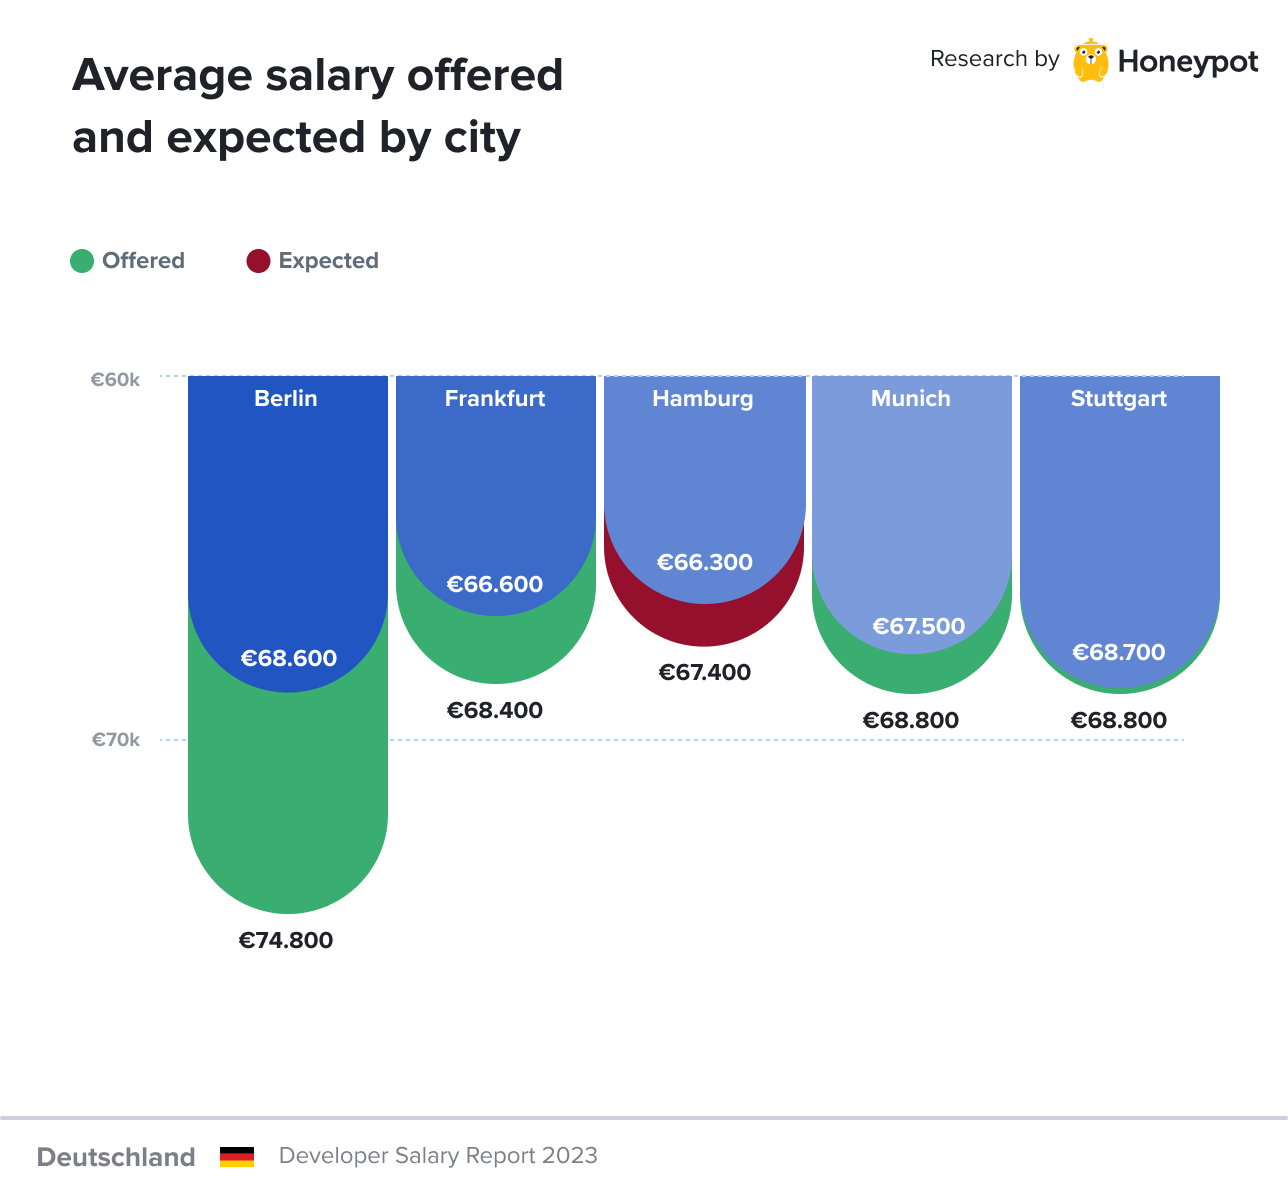 Graph showing average offered and expected developer salary in major German cities